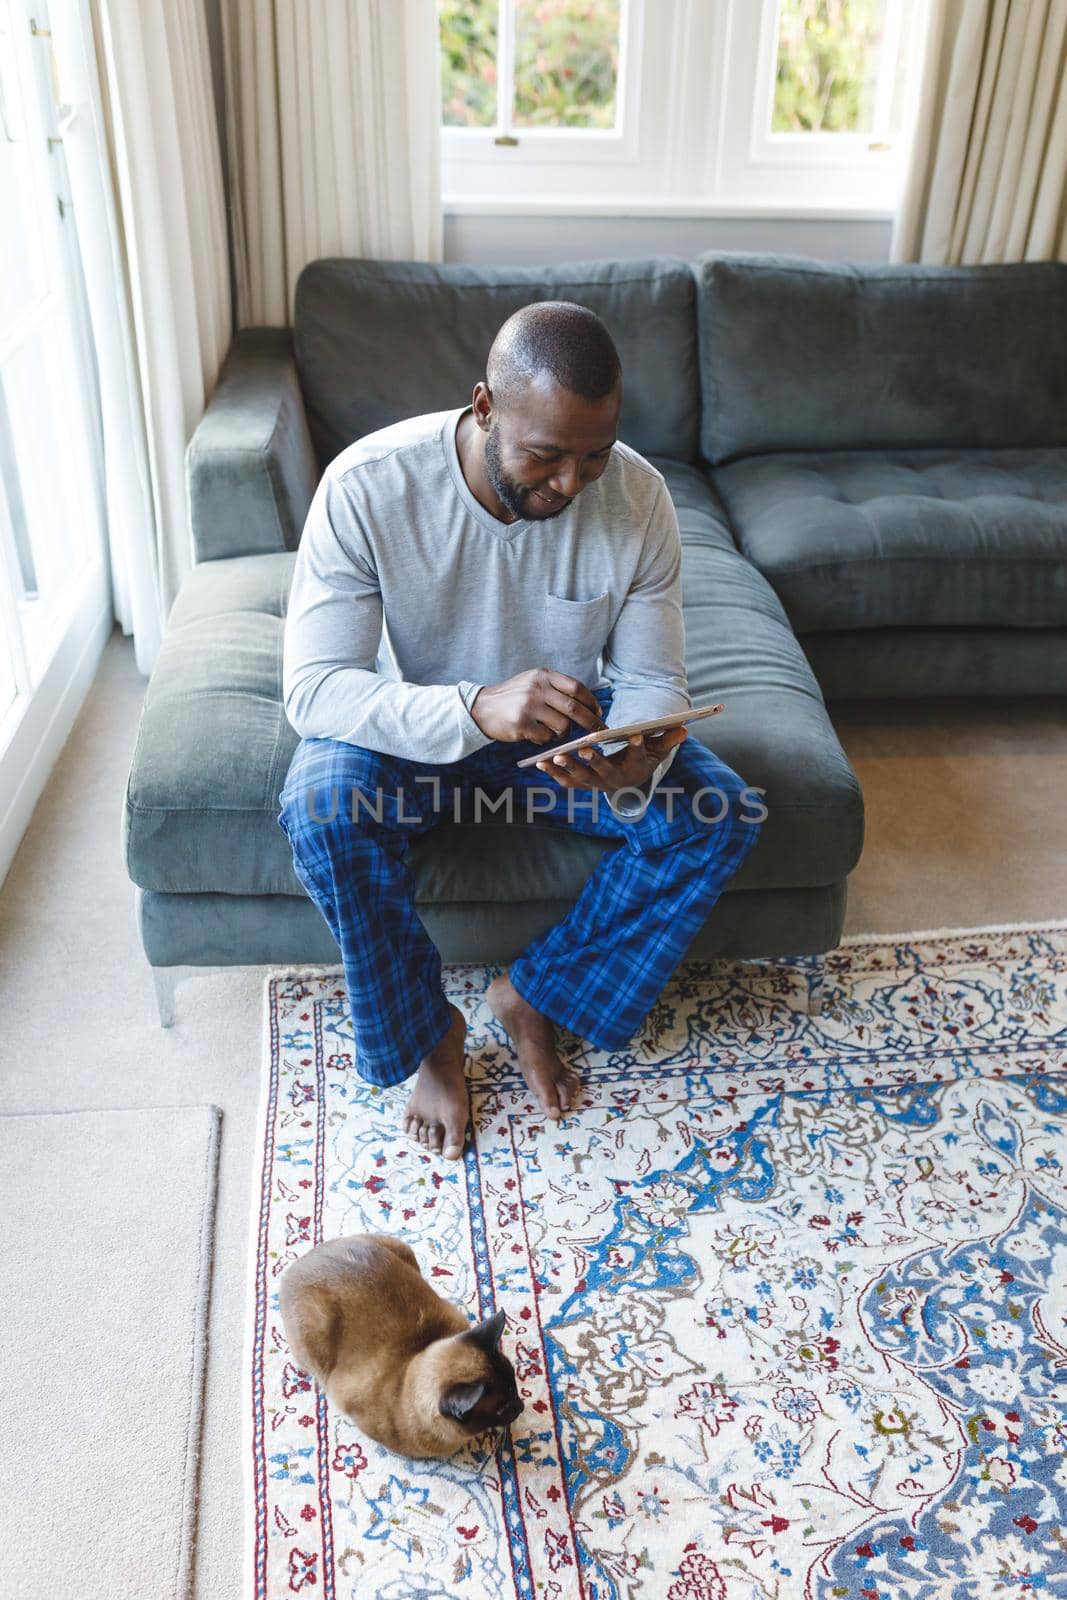 African american man using tablet and sitting on couch in living room. spending time alone at home with technology.